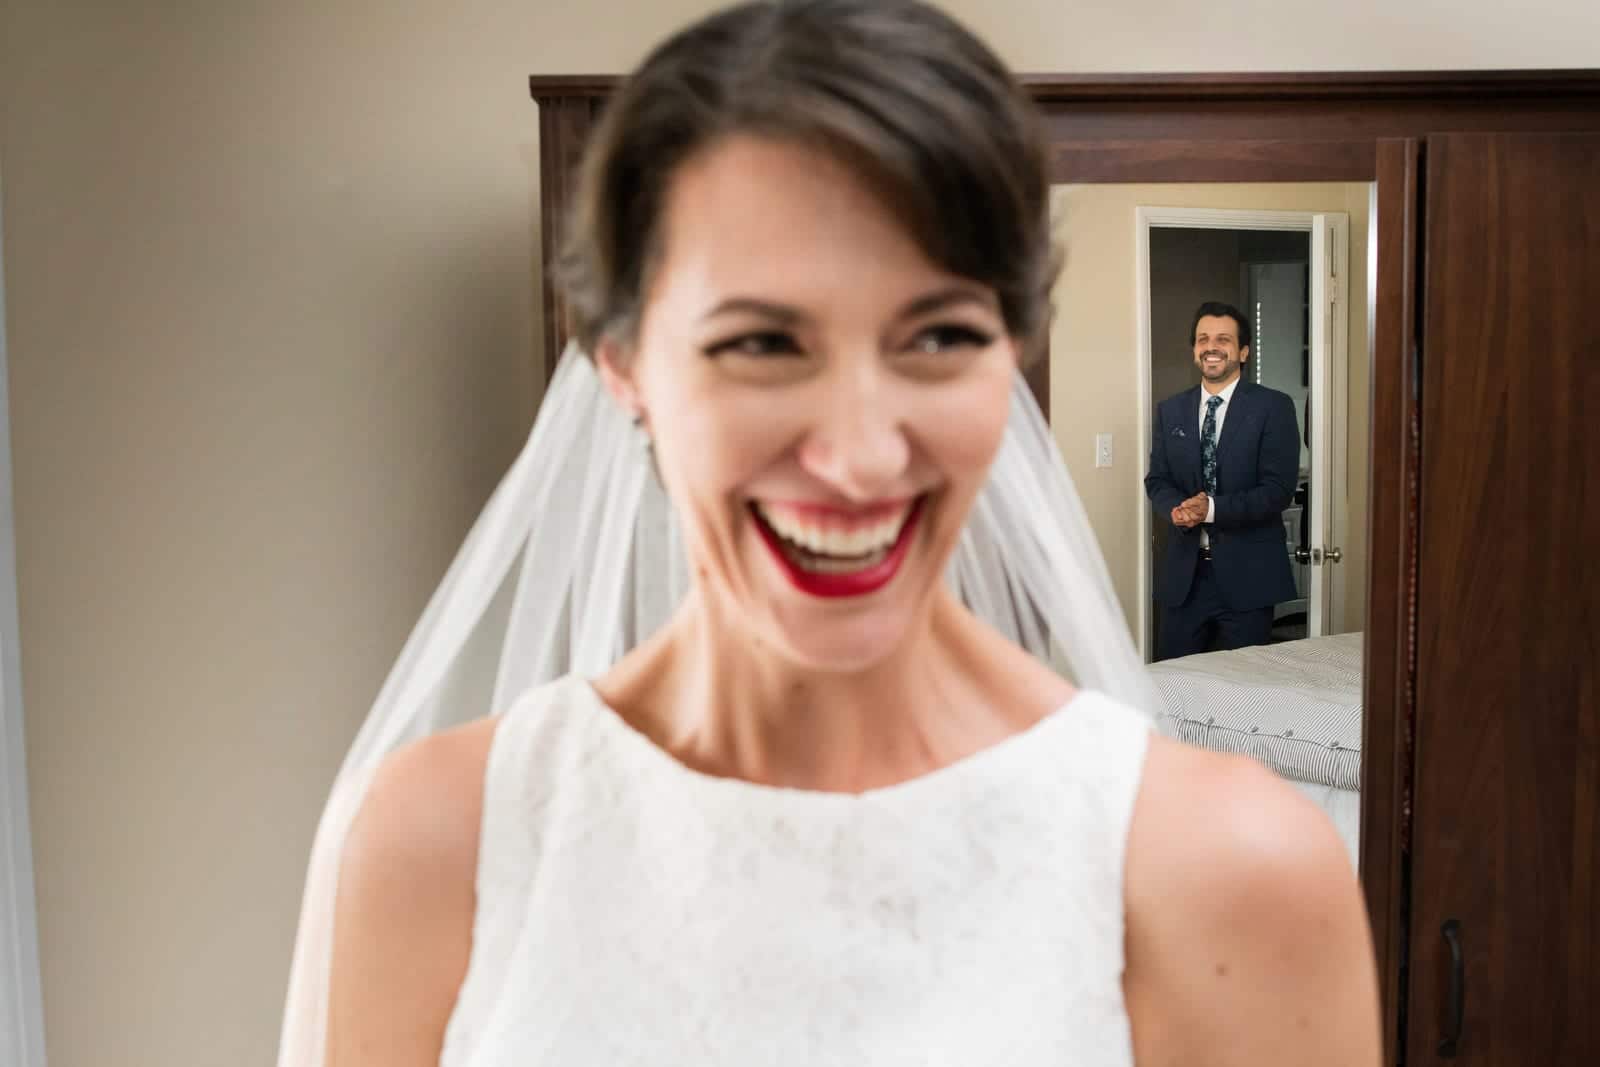 A bride smiles broadly as she sees her husband-to-be walk into the door of a room for their first look. The smiling groom is seen in the mirror behind her.